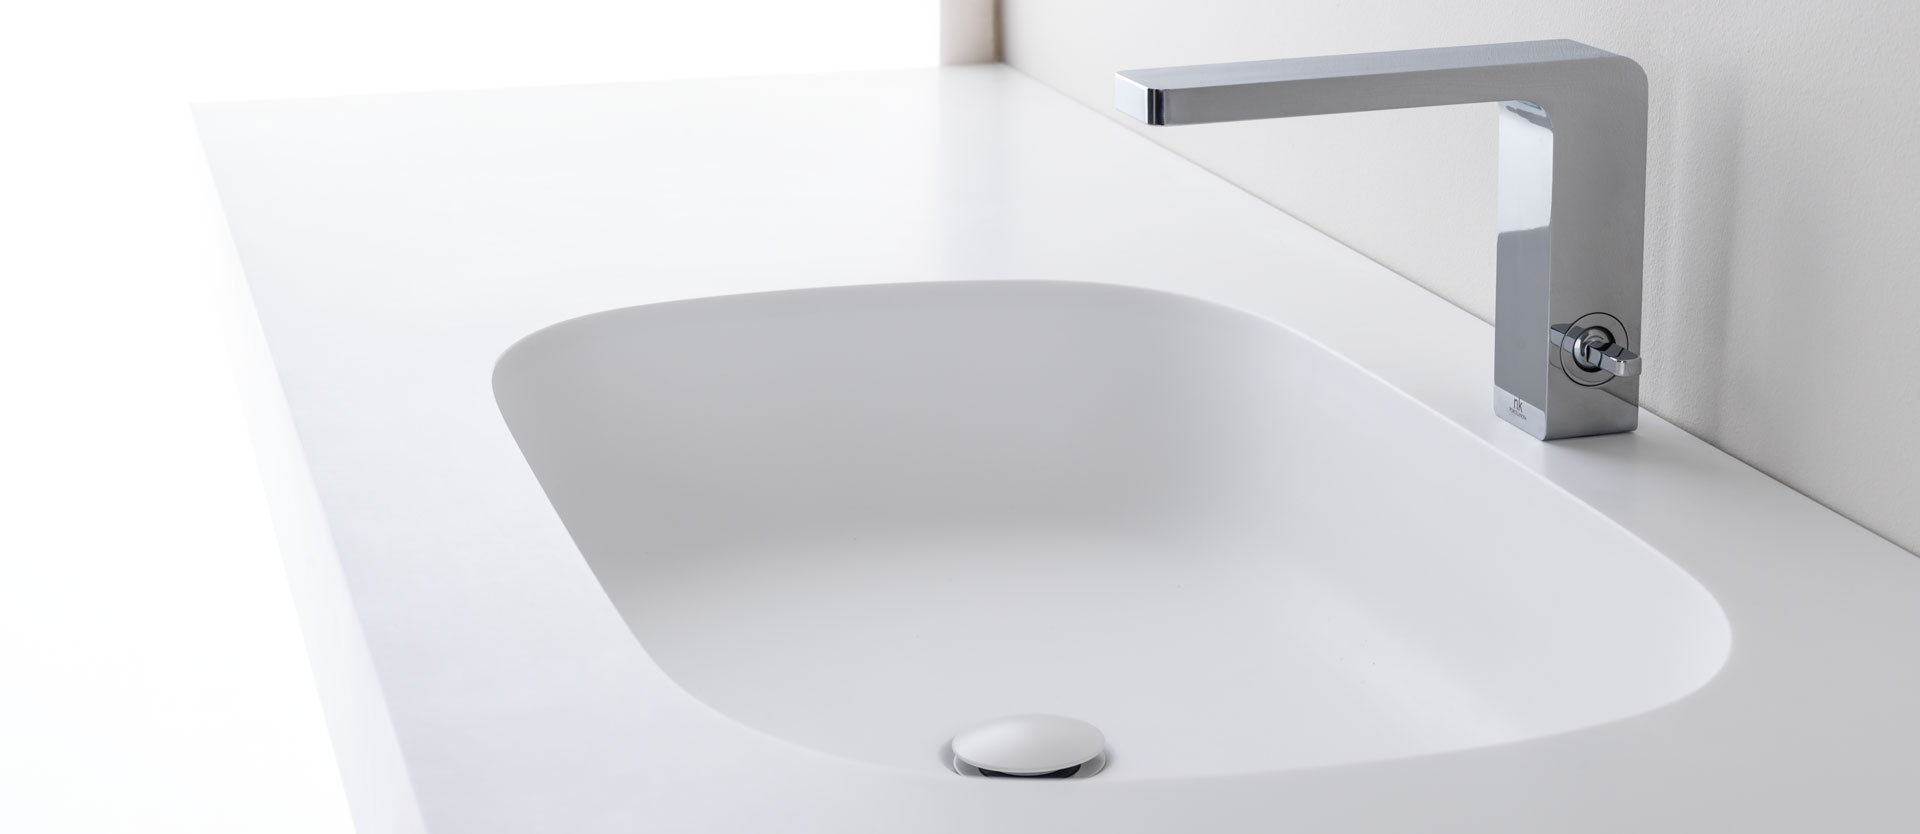 Antimicrobial Sink